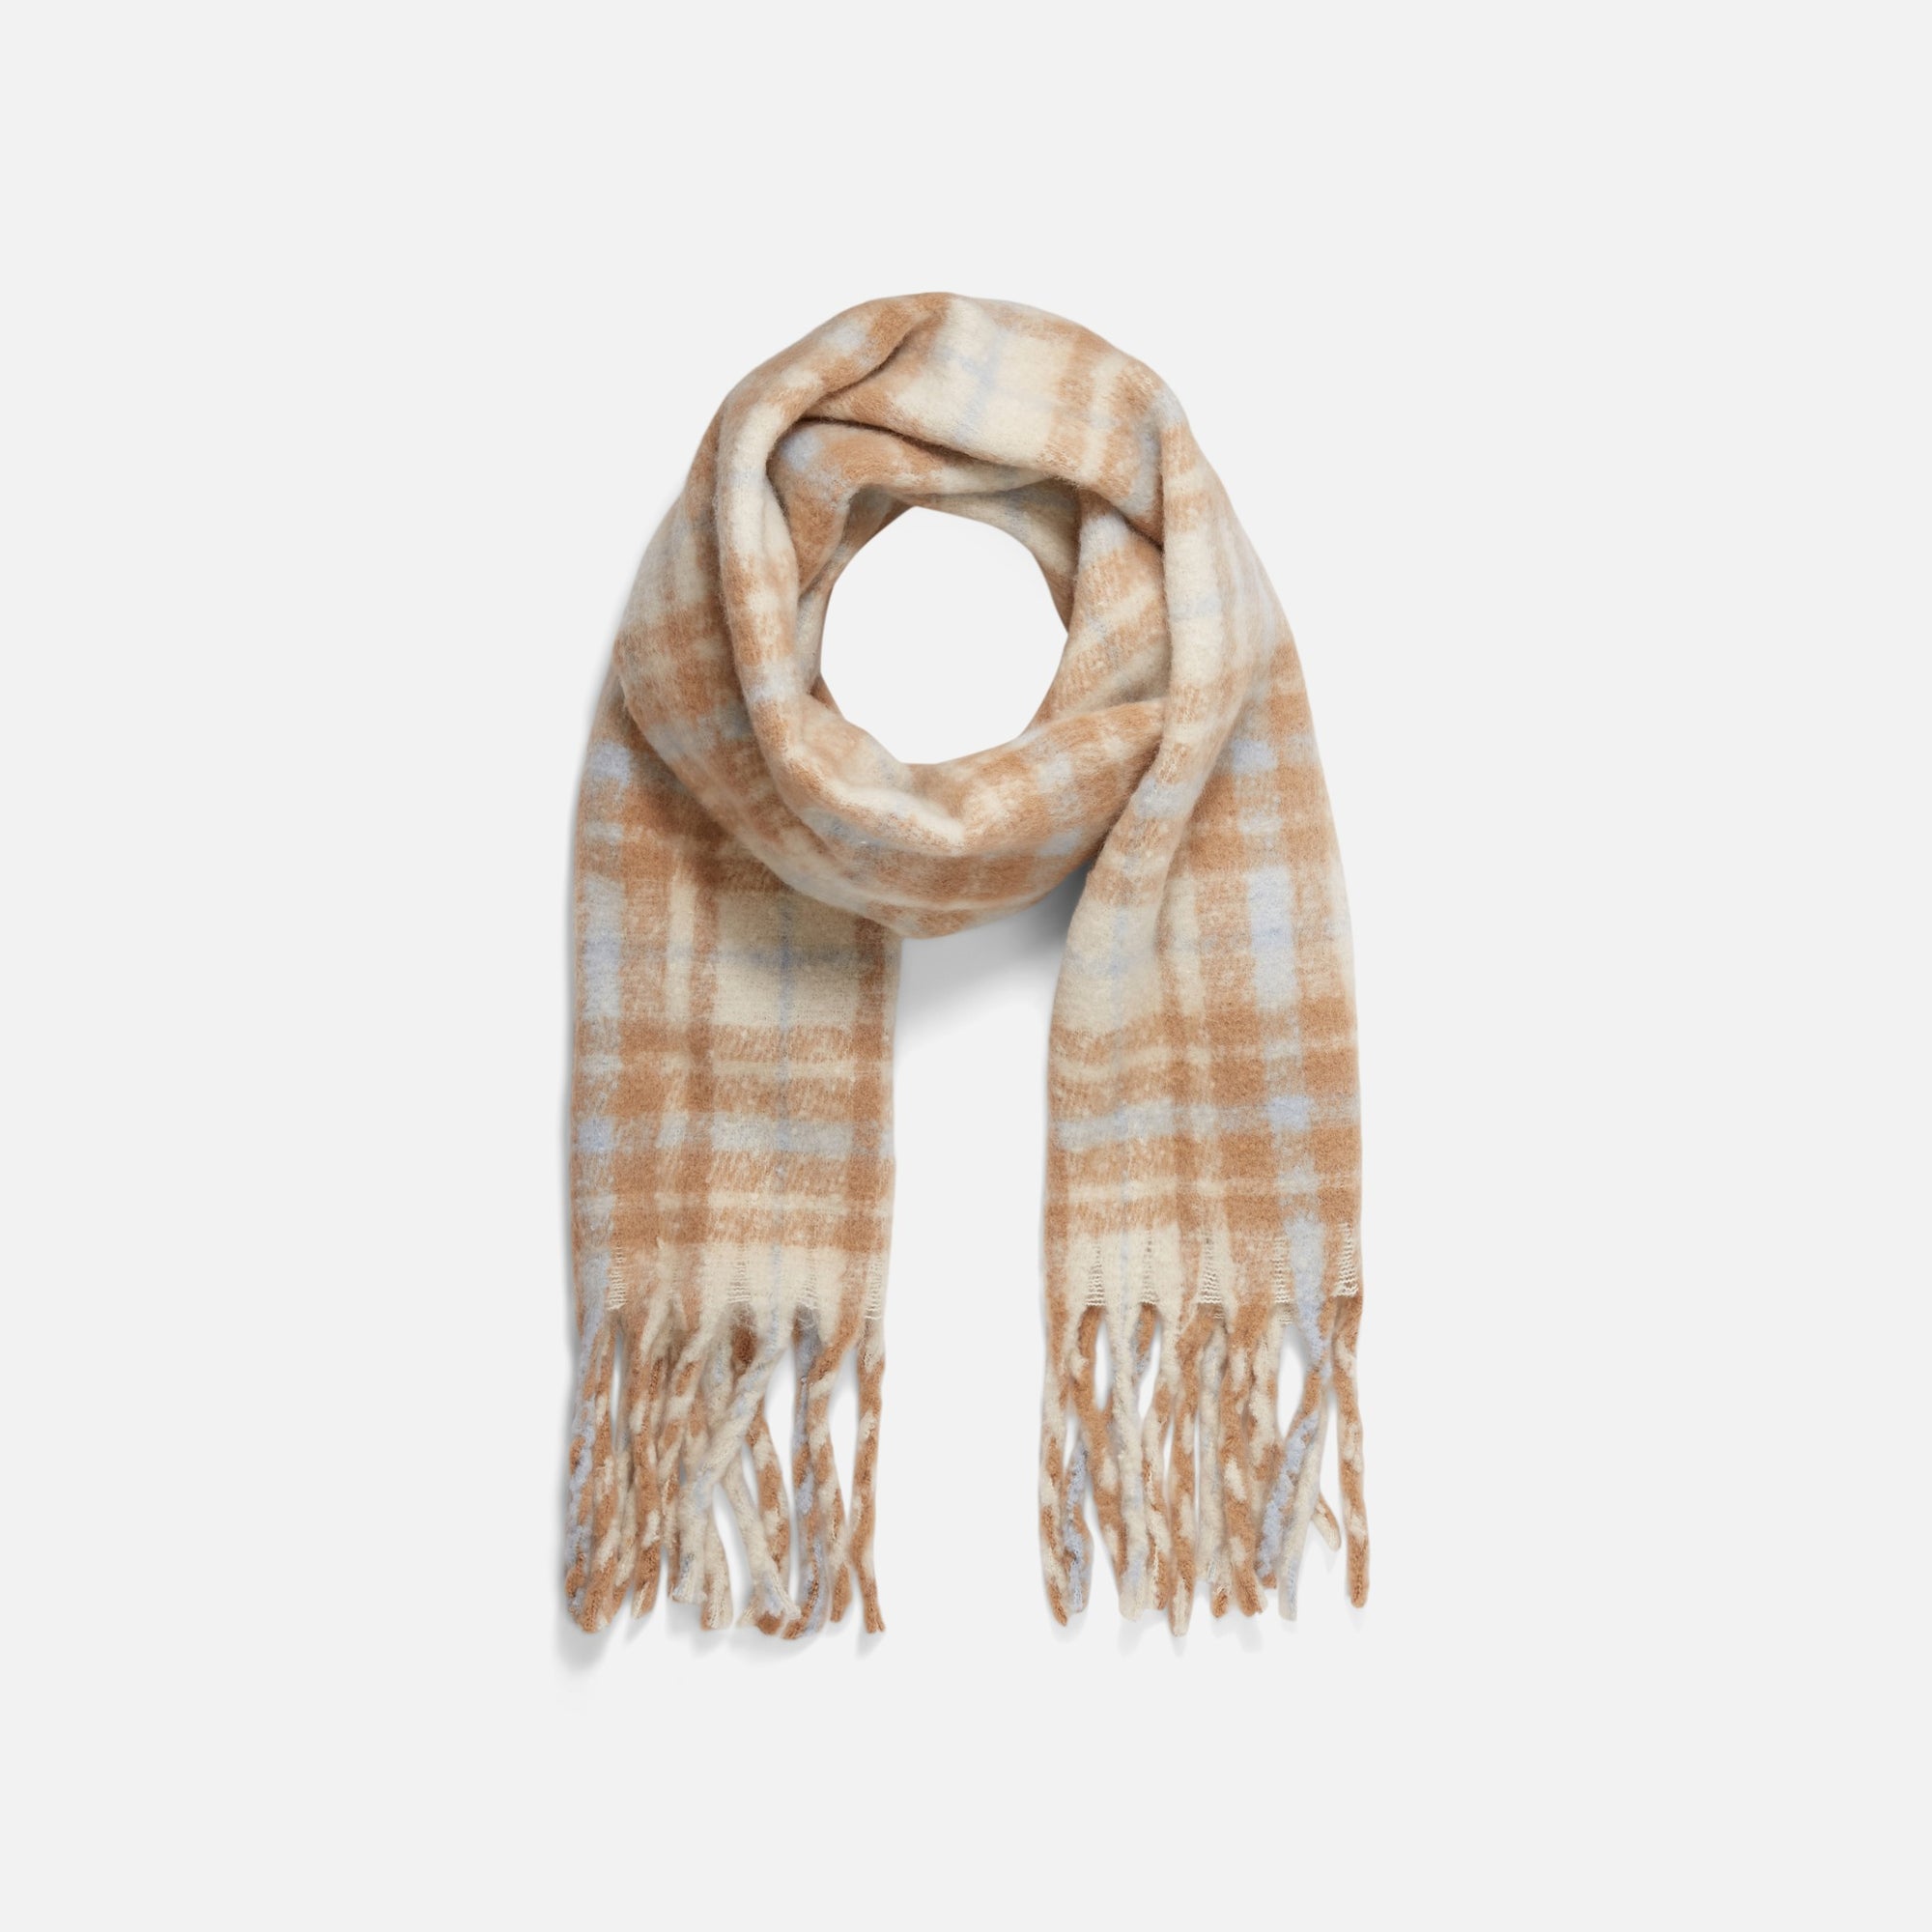 Cozy beige and blue plaid scarf